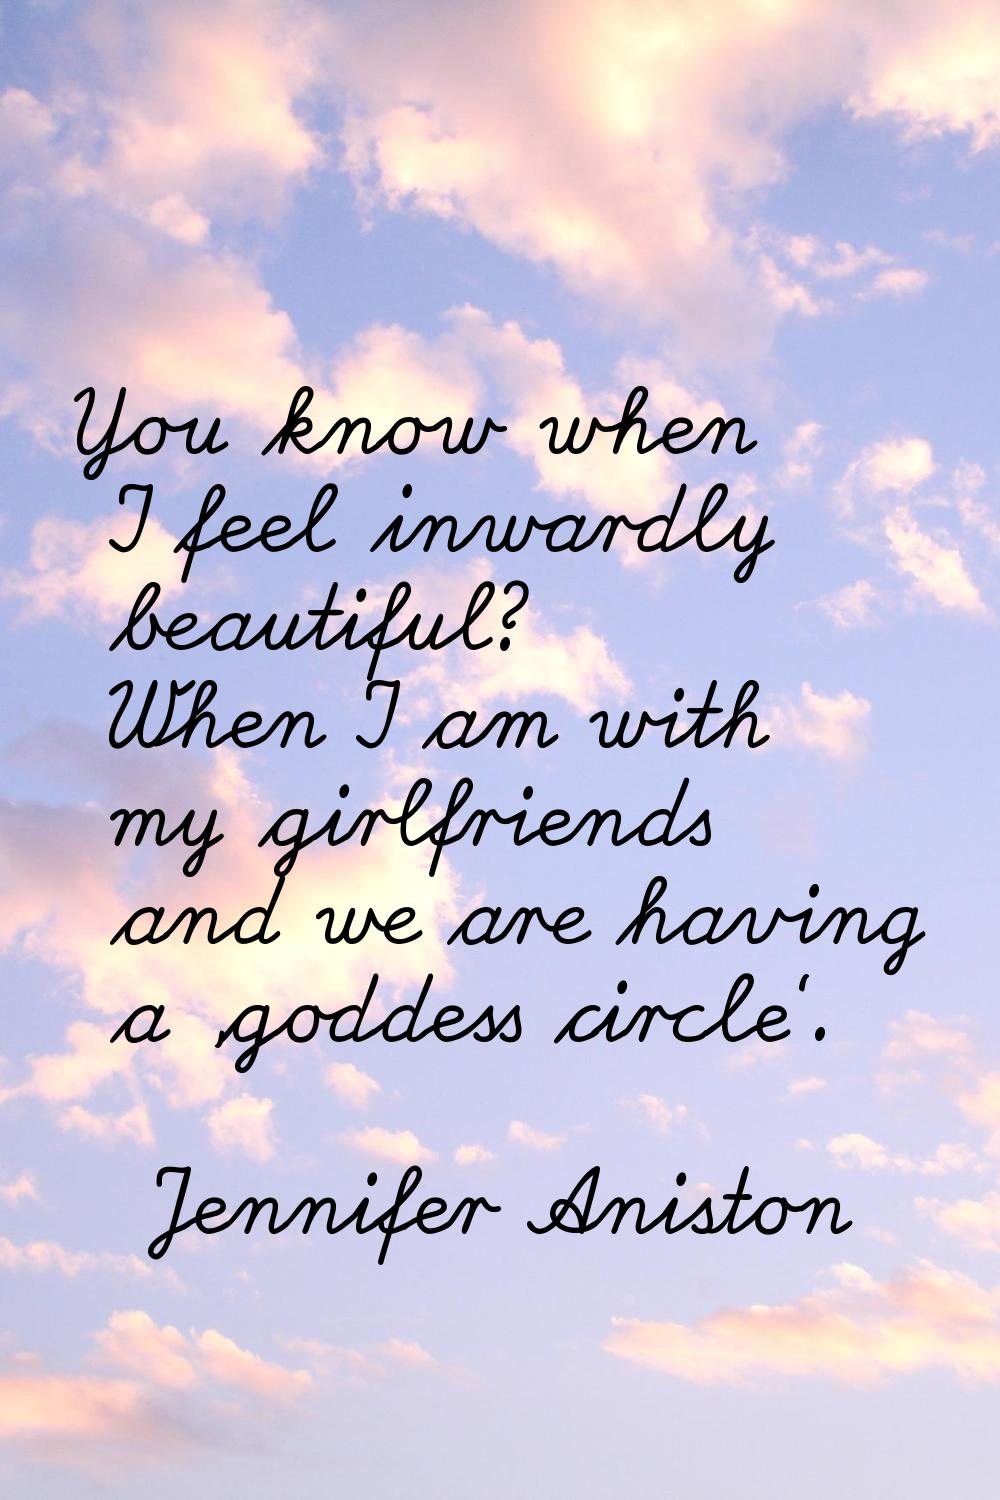 You know when I feel inwardly beautiful? When I am with my girlfriends and we are having a 'goddess